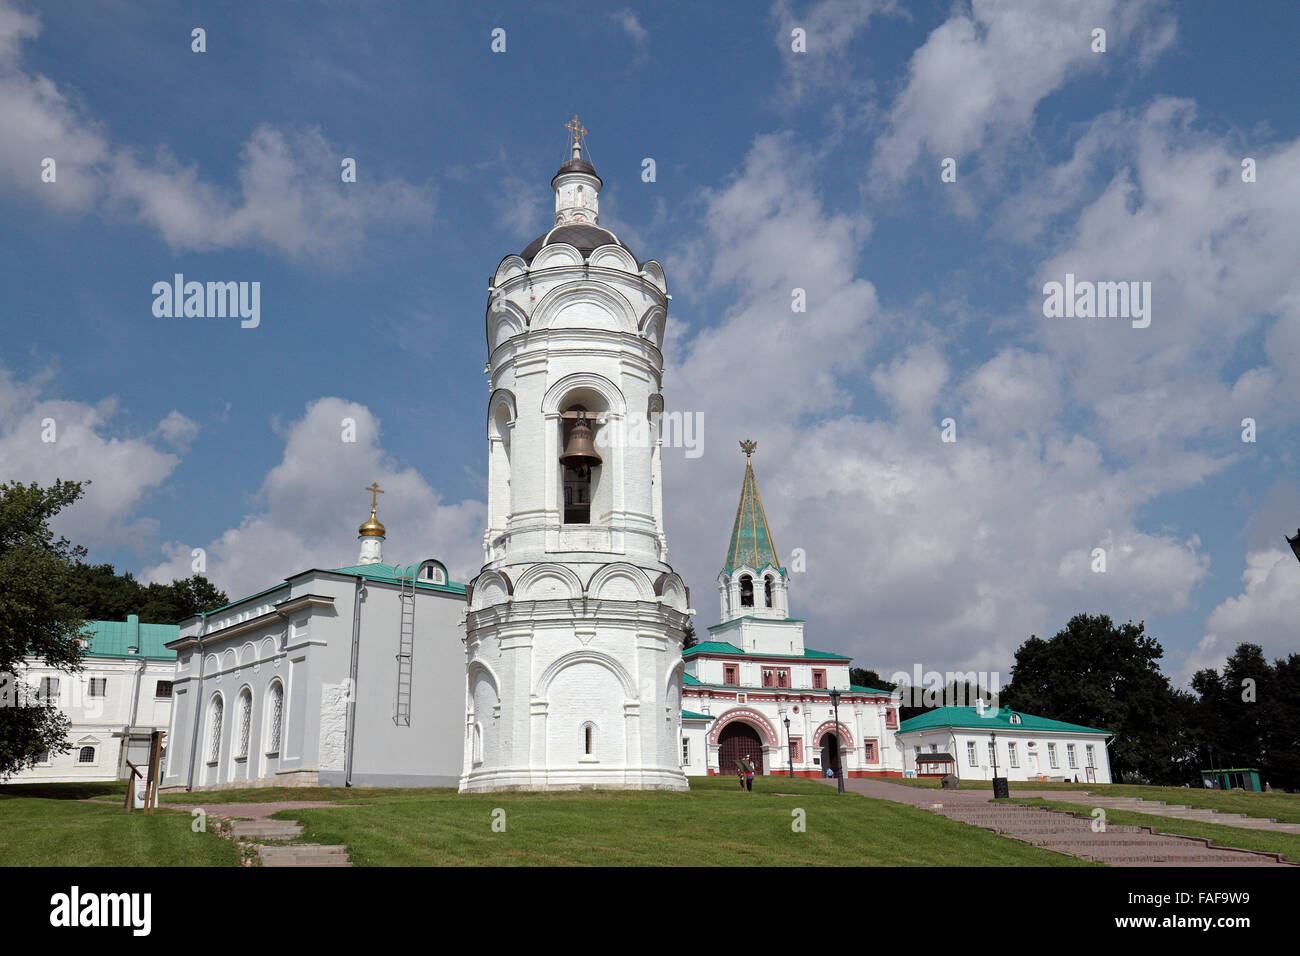 The Bell tower and Front Gates, Kolomenskoye (Kolomenskoye Historical and Architectural Museum and Reserve), Moscow, Russia. Stock Photo